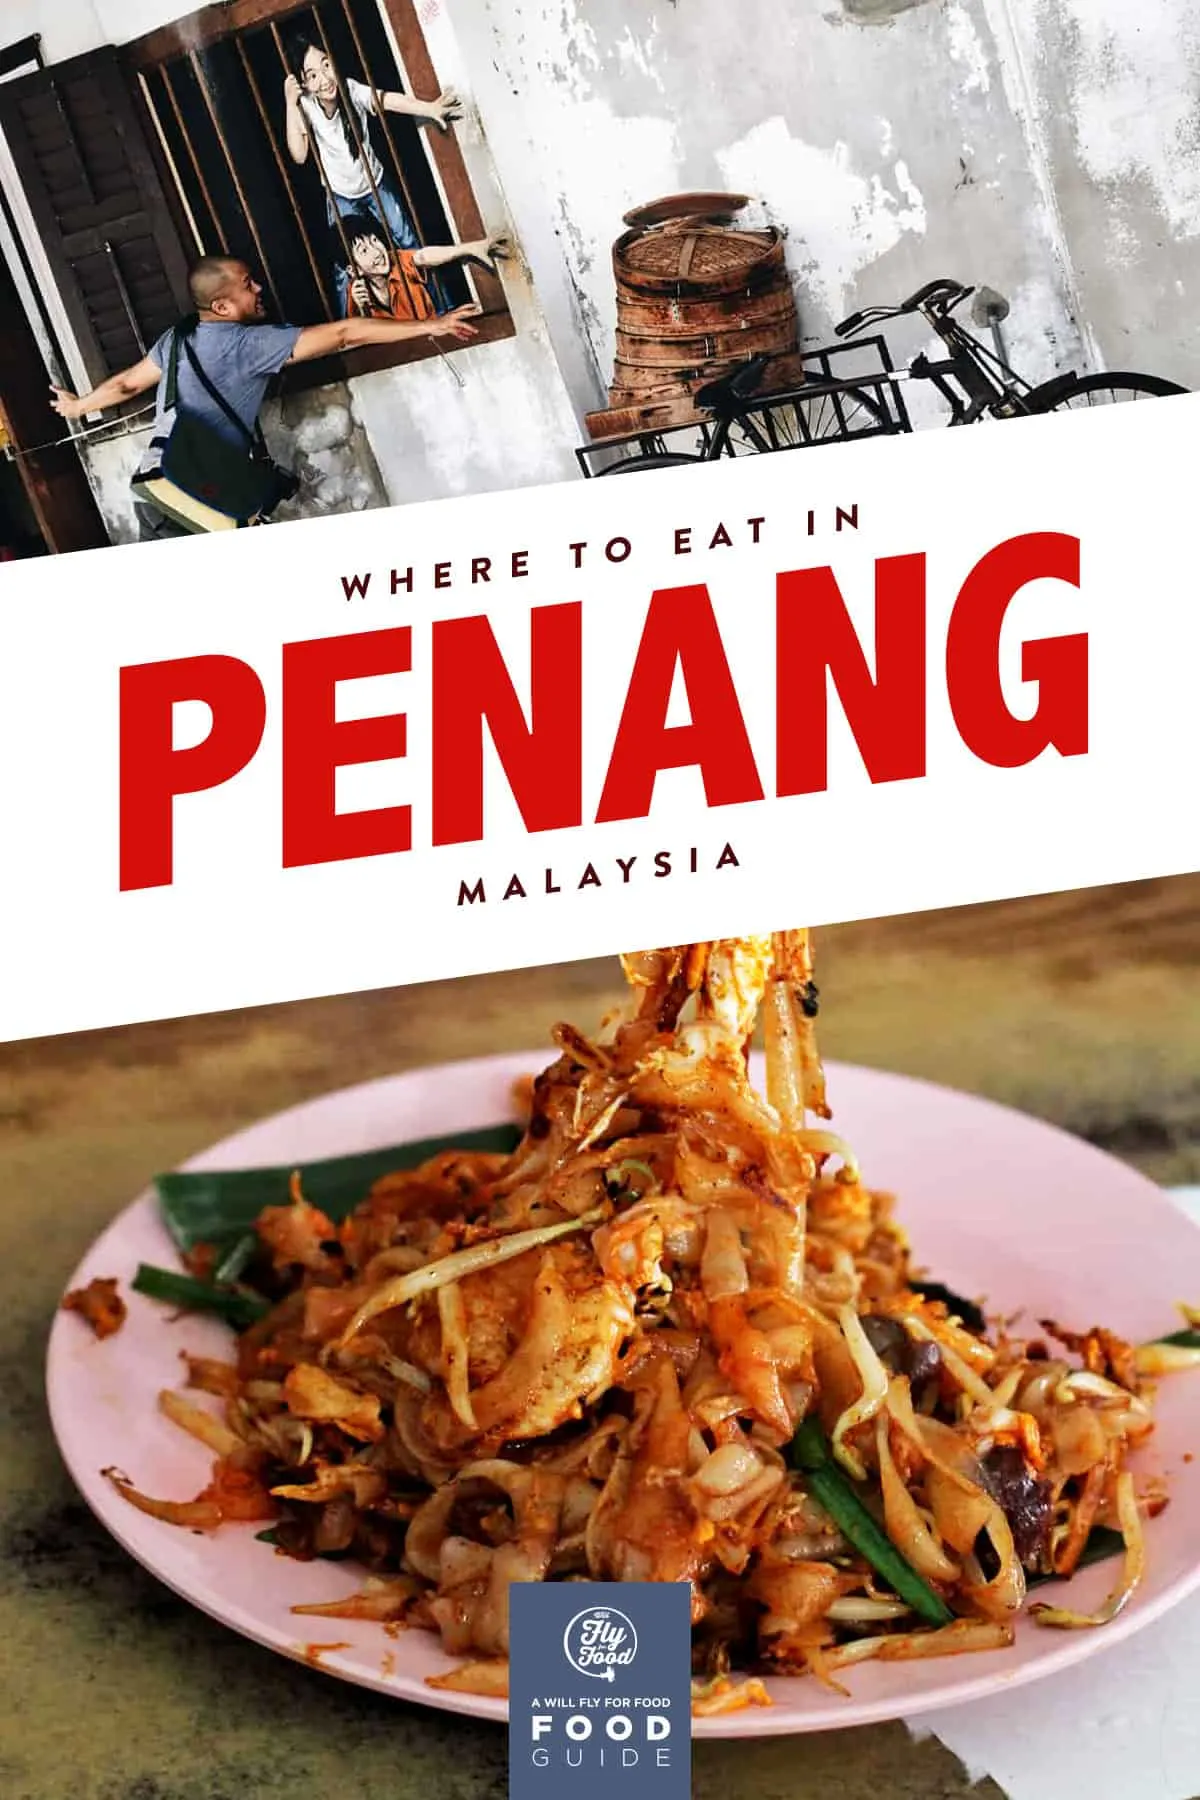 Char Koay Teow in Penang, Malaysia